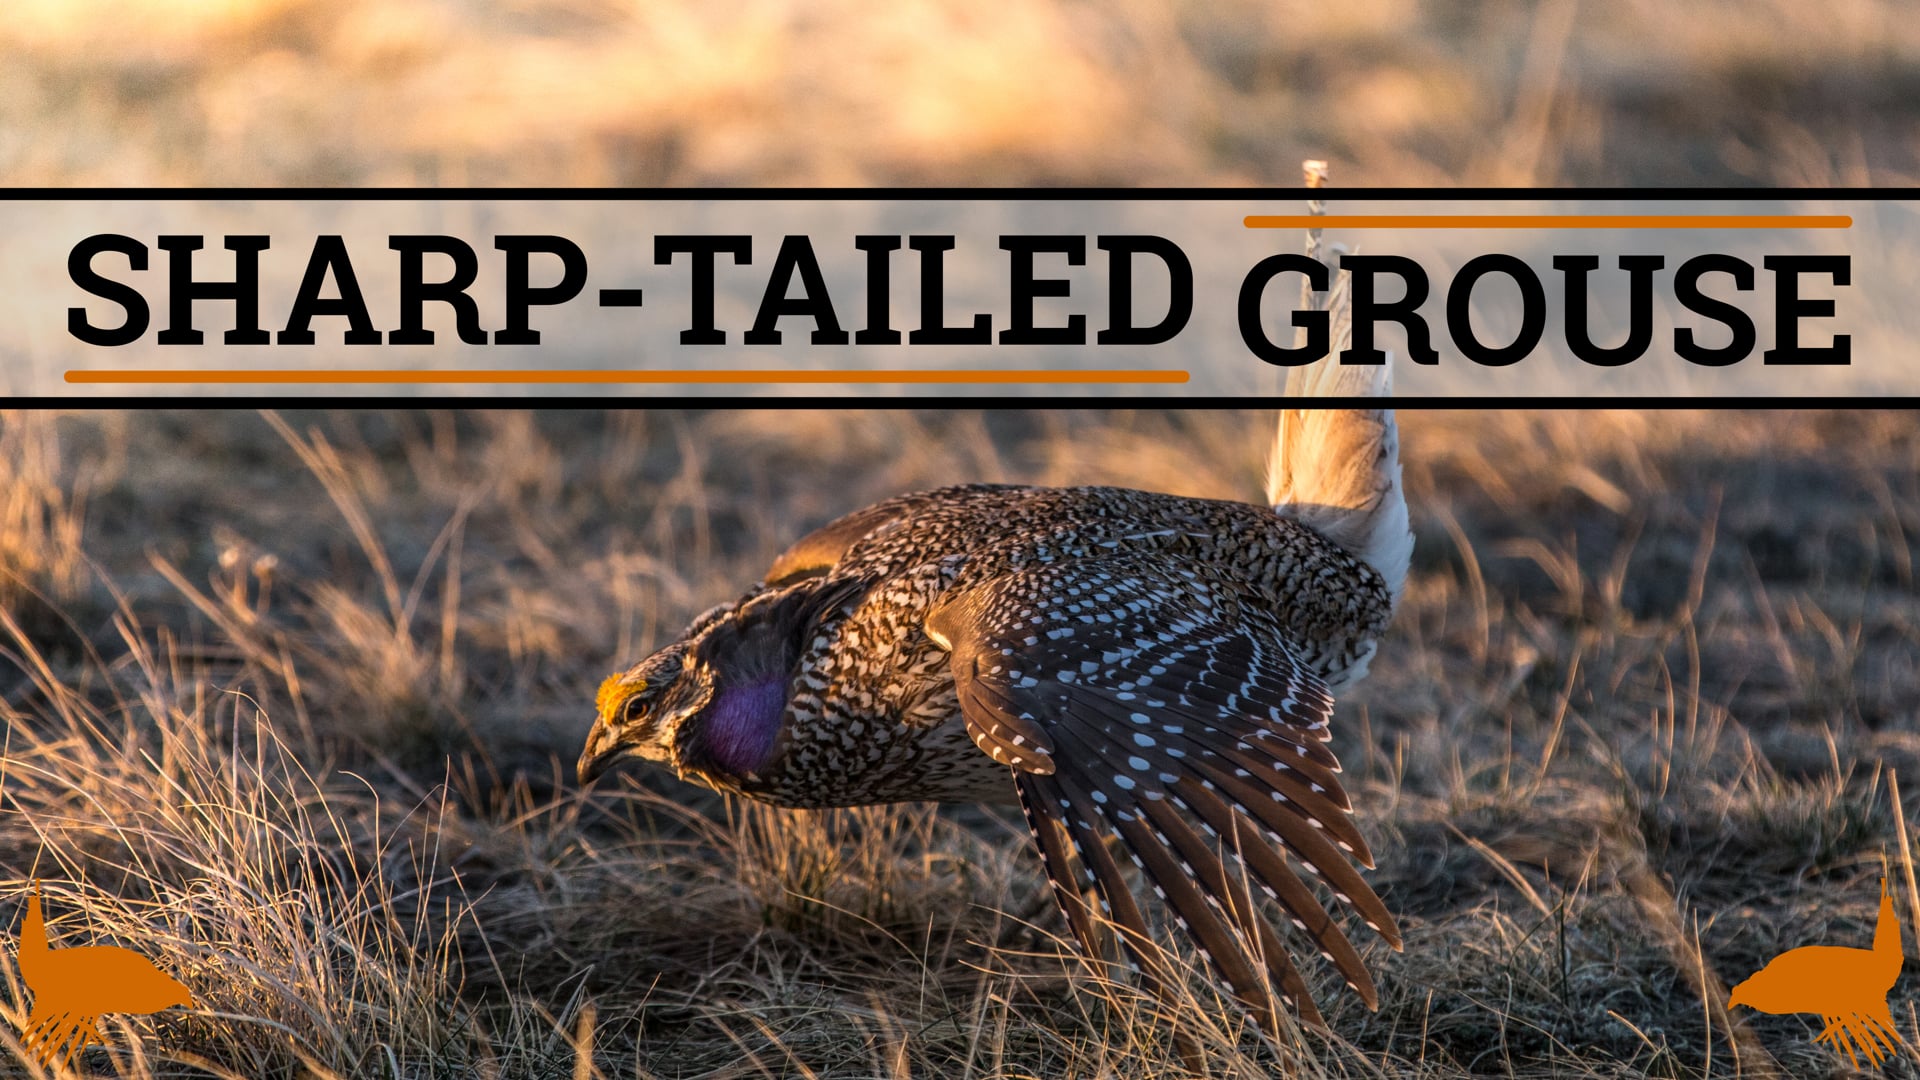 SHARP-TAILED GROUSE